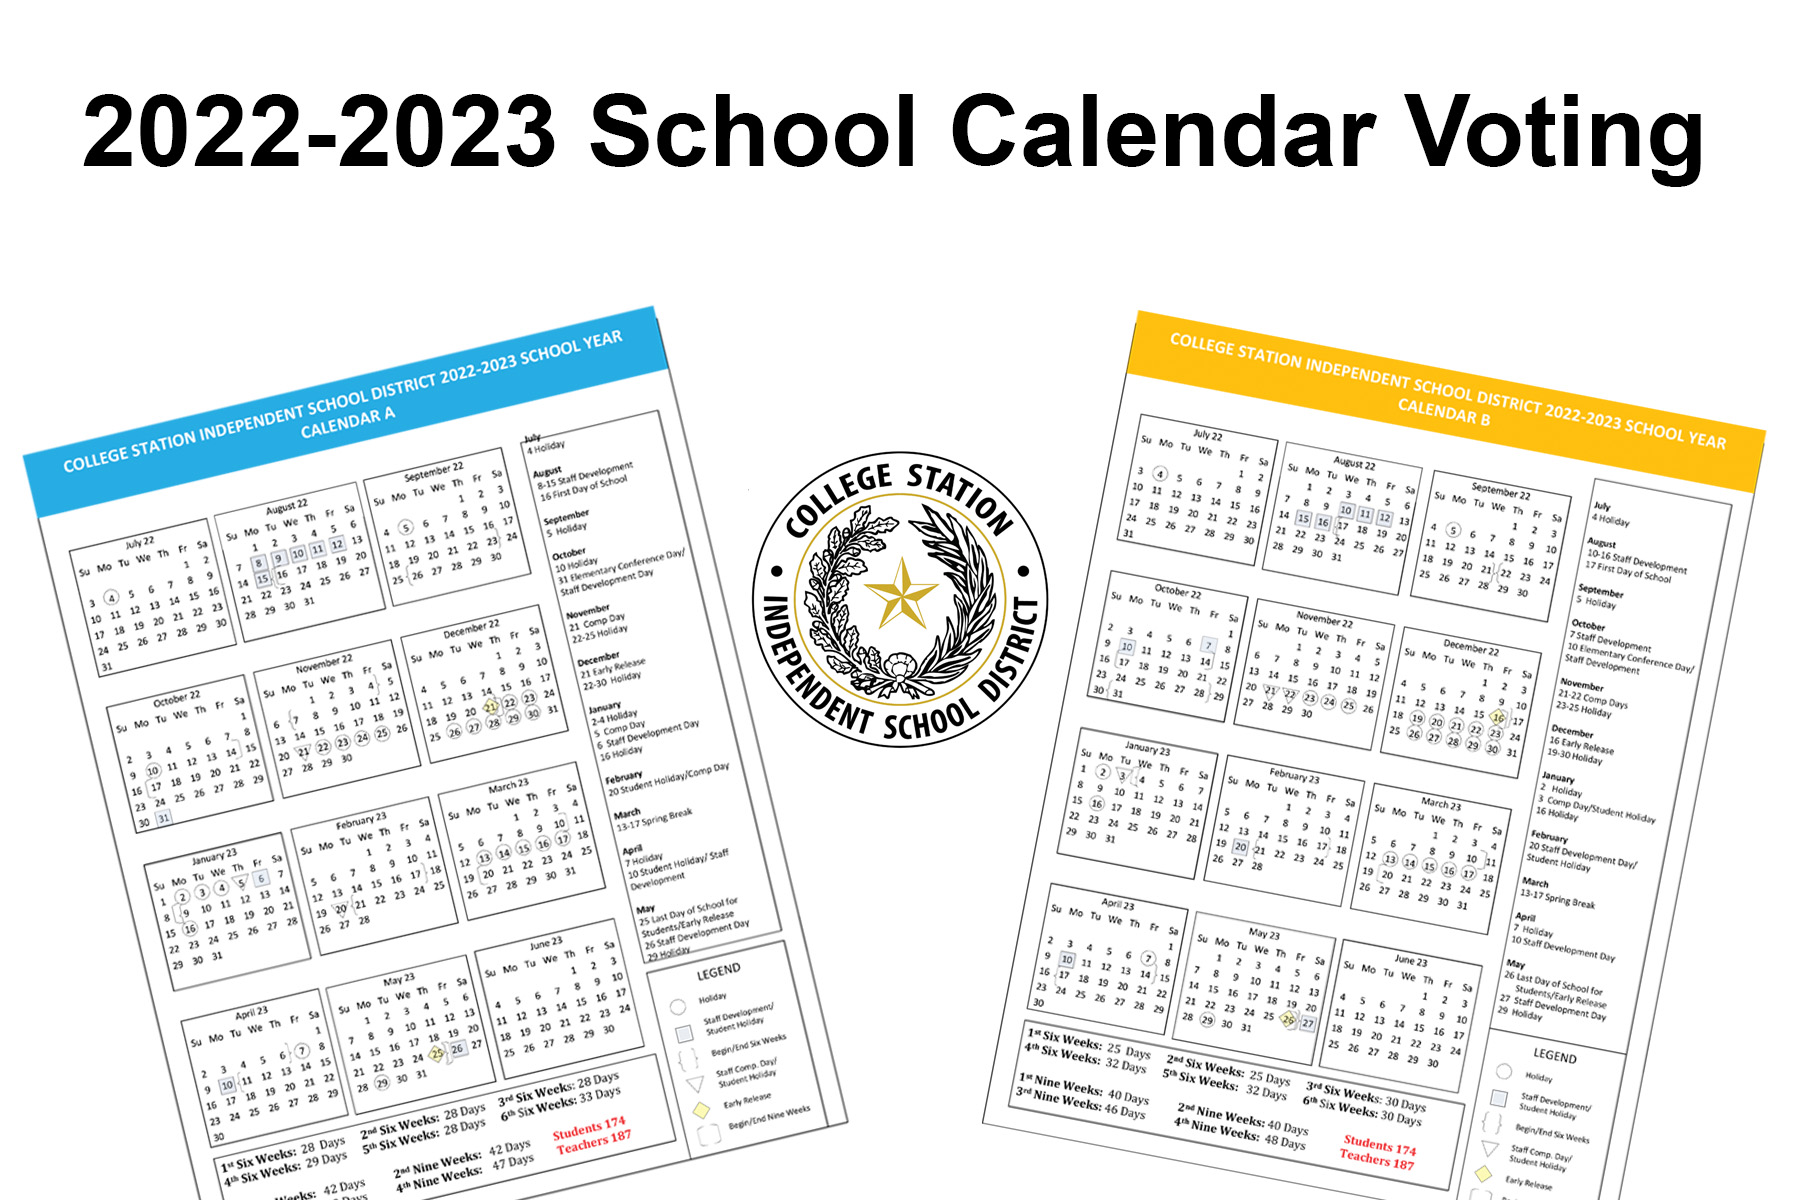 College Station Isd Calendar 2022 23 College Station Isd On Twitter: "It's Calendar Voting Time. Please Take A  Few Minutes To Review The Two Options For The 2022-2023 Csisd School  Calendar. After Review, Pick Your Favorite And Provide